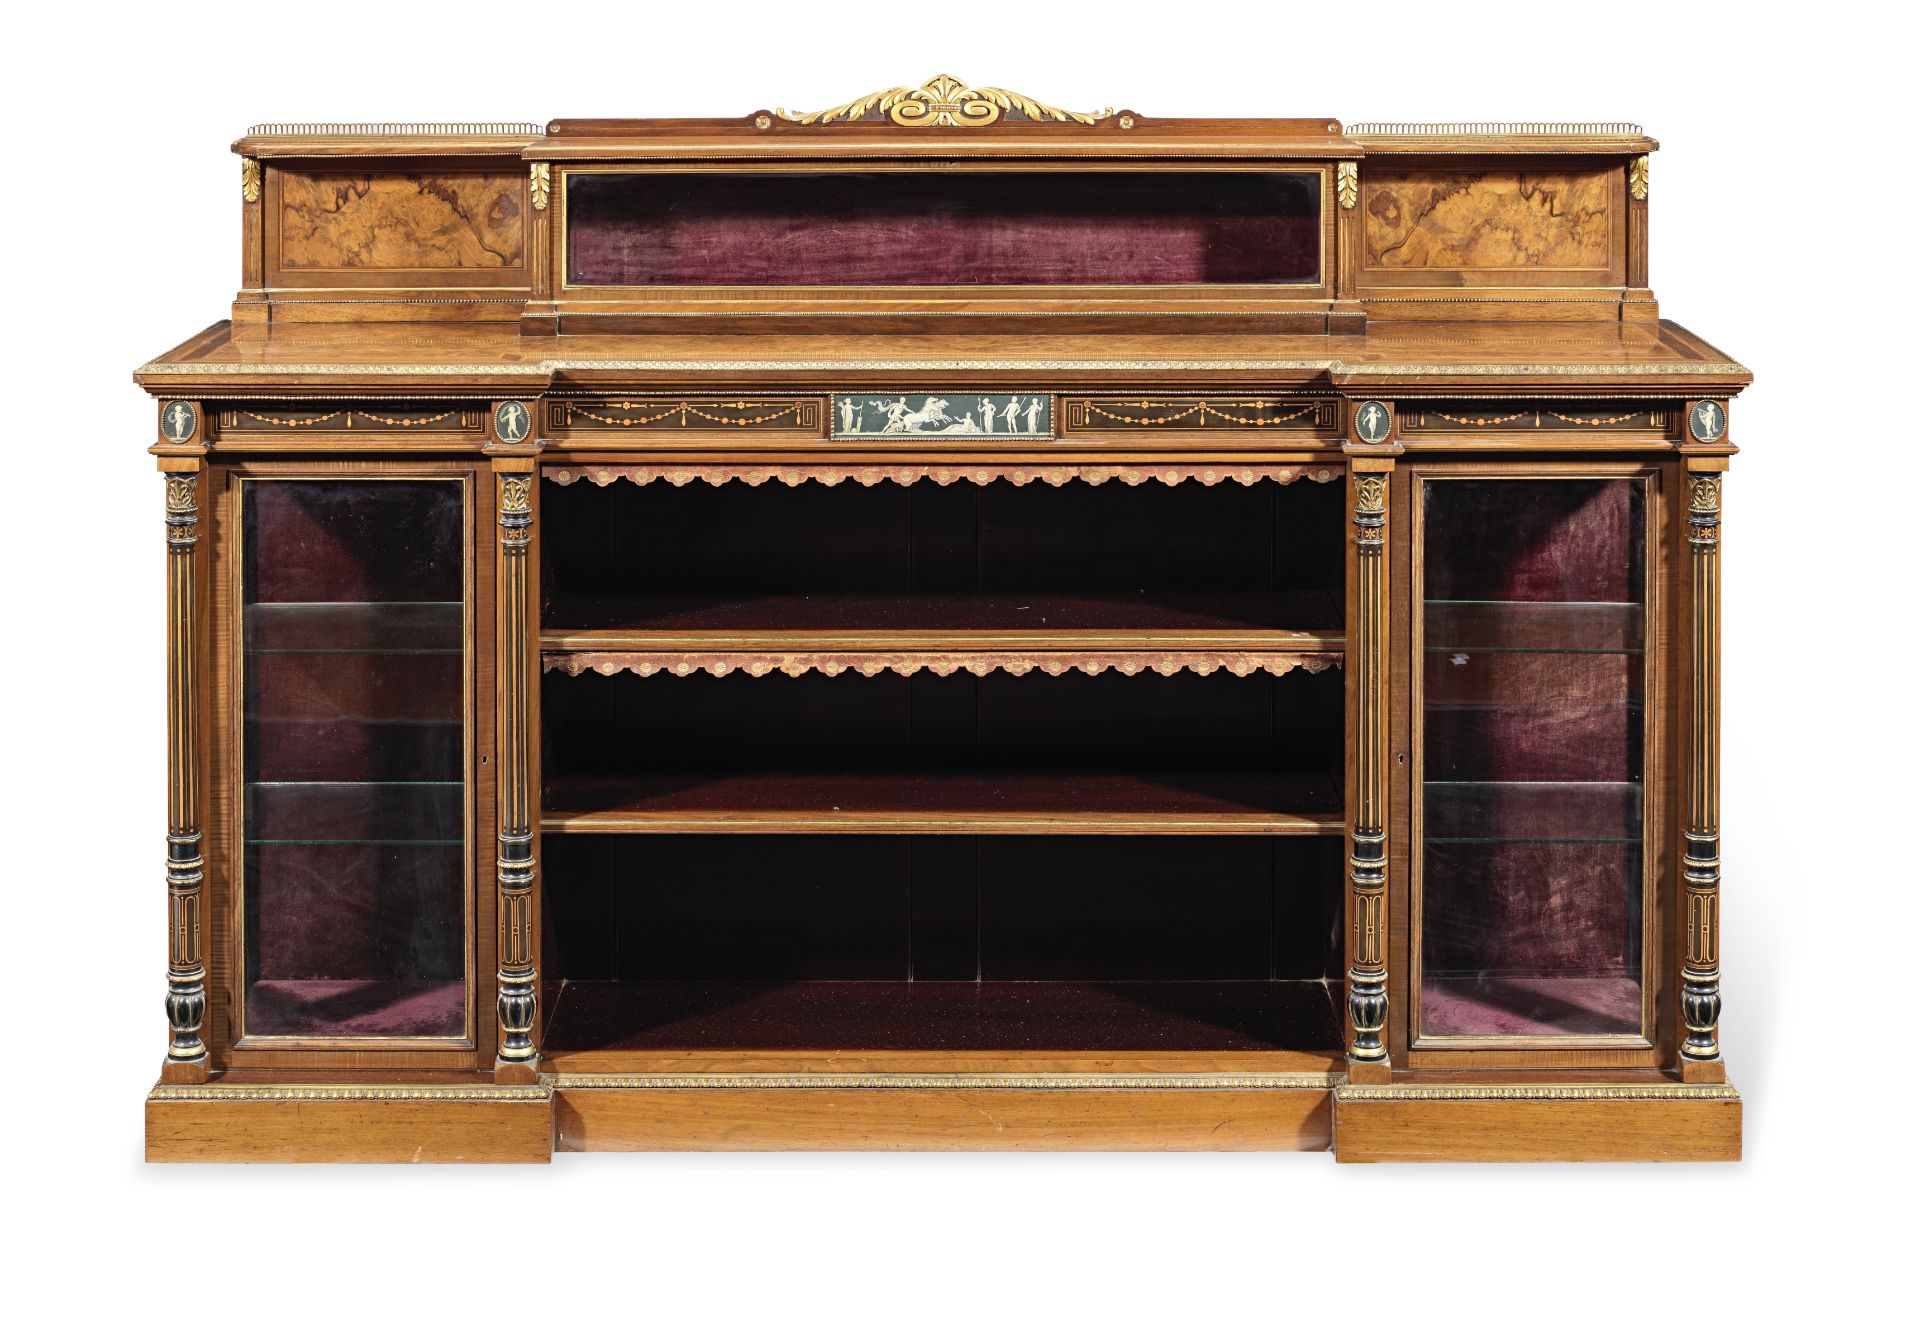 A mid Victorian walnut, purplewood, harewood and inlaid low display cabinet